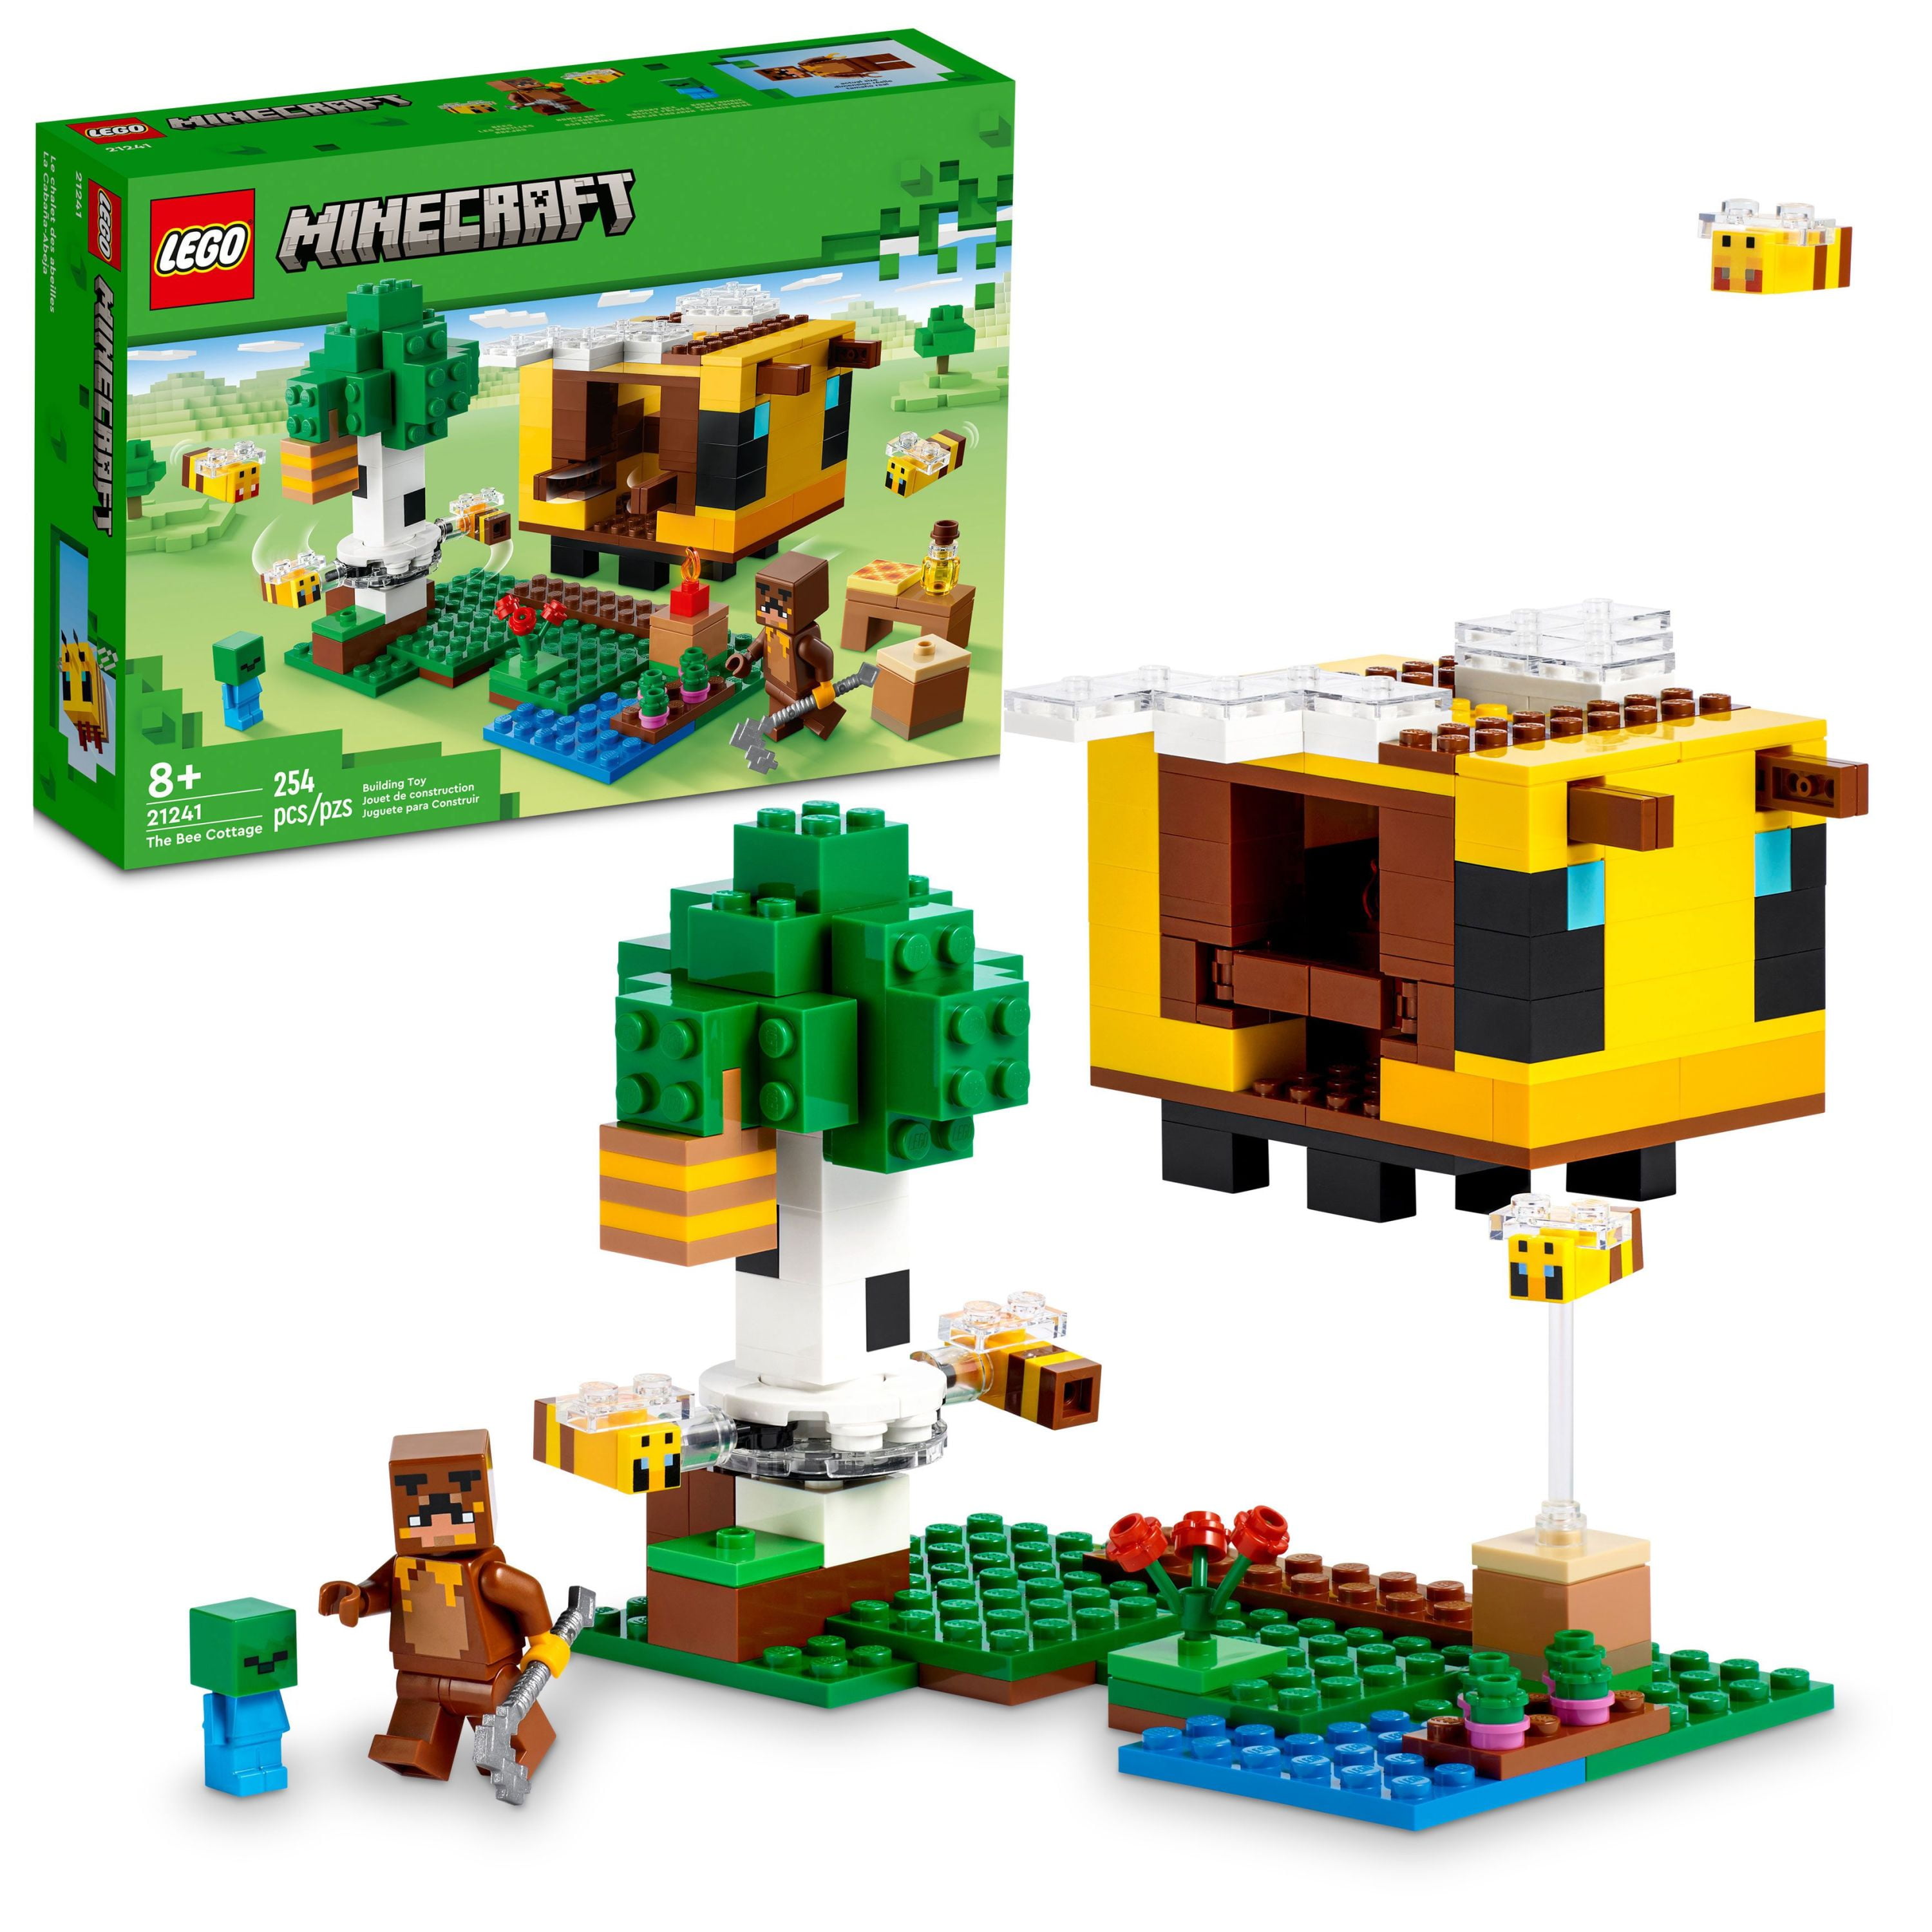 LEGO Minecraft The Abandoned Village Building Kit 21190, Minecraft Zombie  Toy Set, Gift Idea for Kids Girls Boys Age 8+ Featuring Game Figures